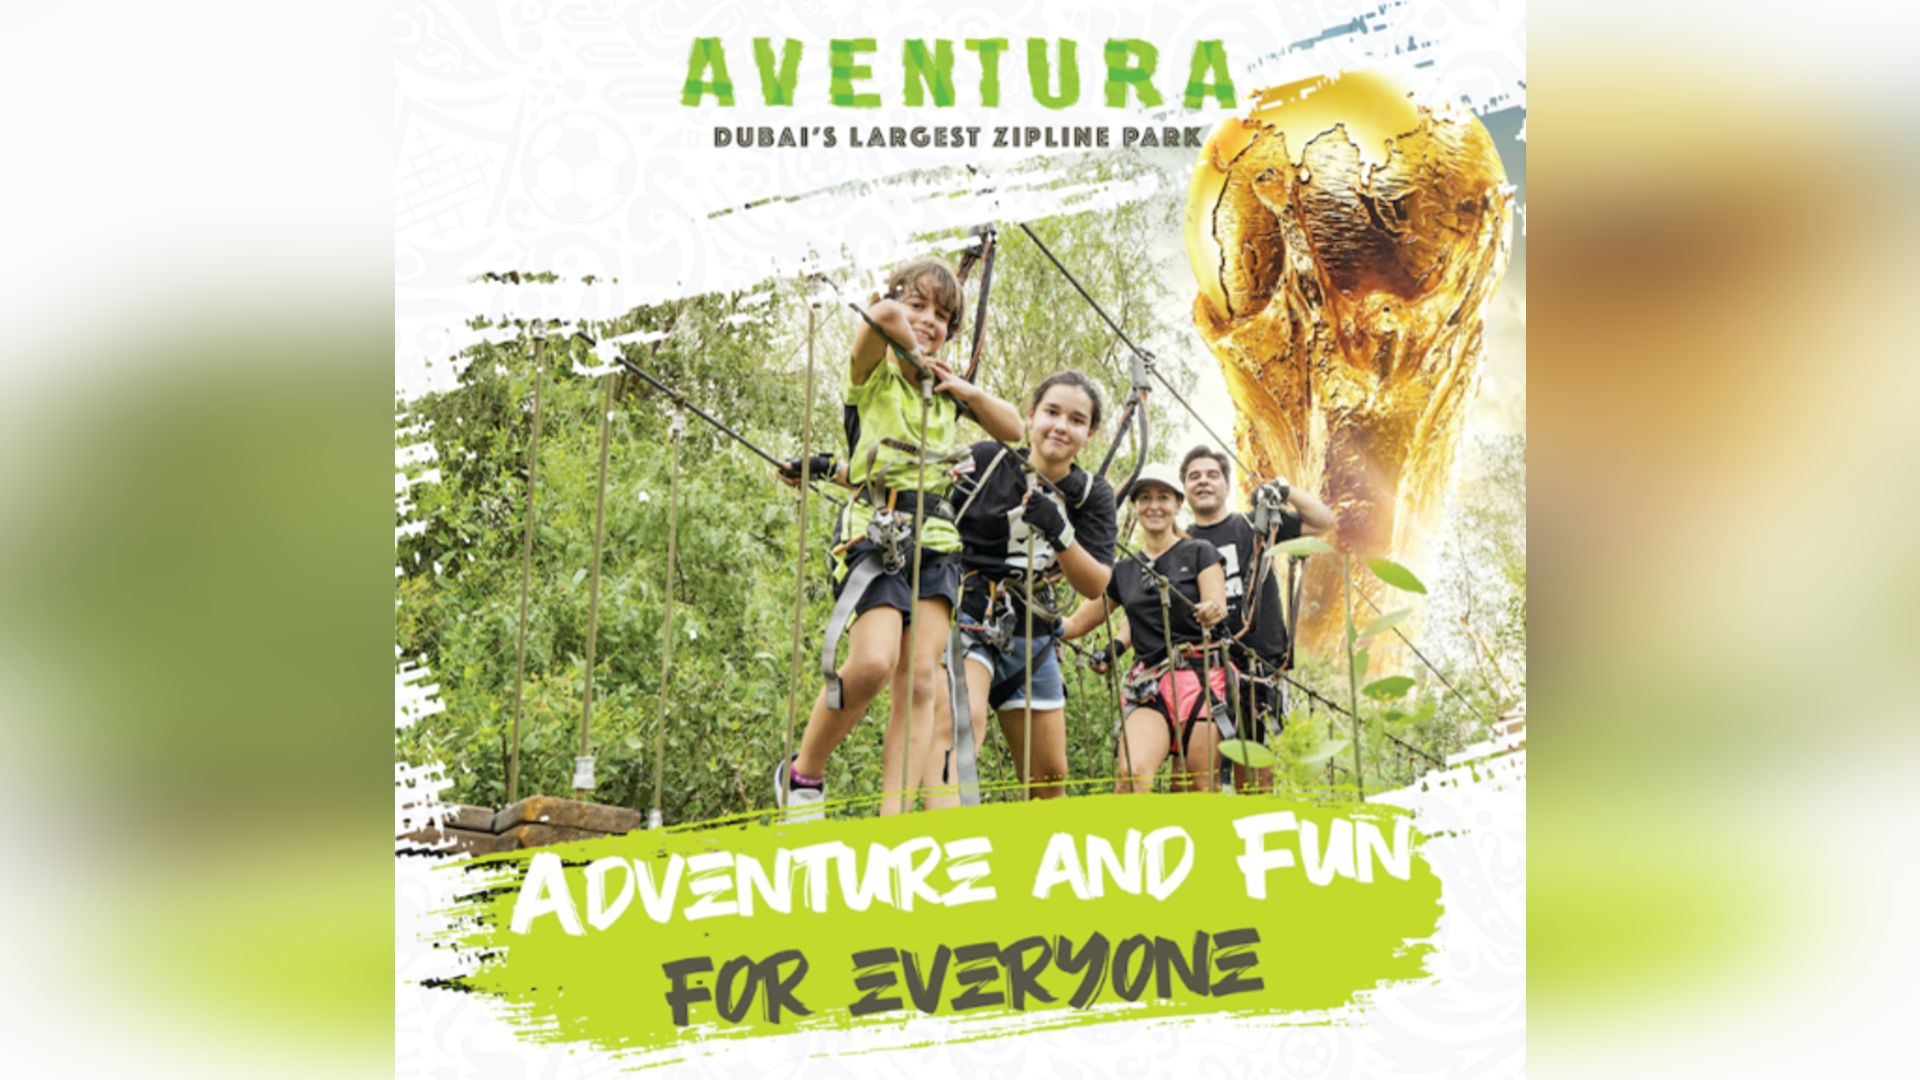 AVENTURA PARKS WELCOMES WORLD CUP FANS FOR UNLIMITED ADVENTURE AND FUN